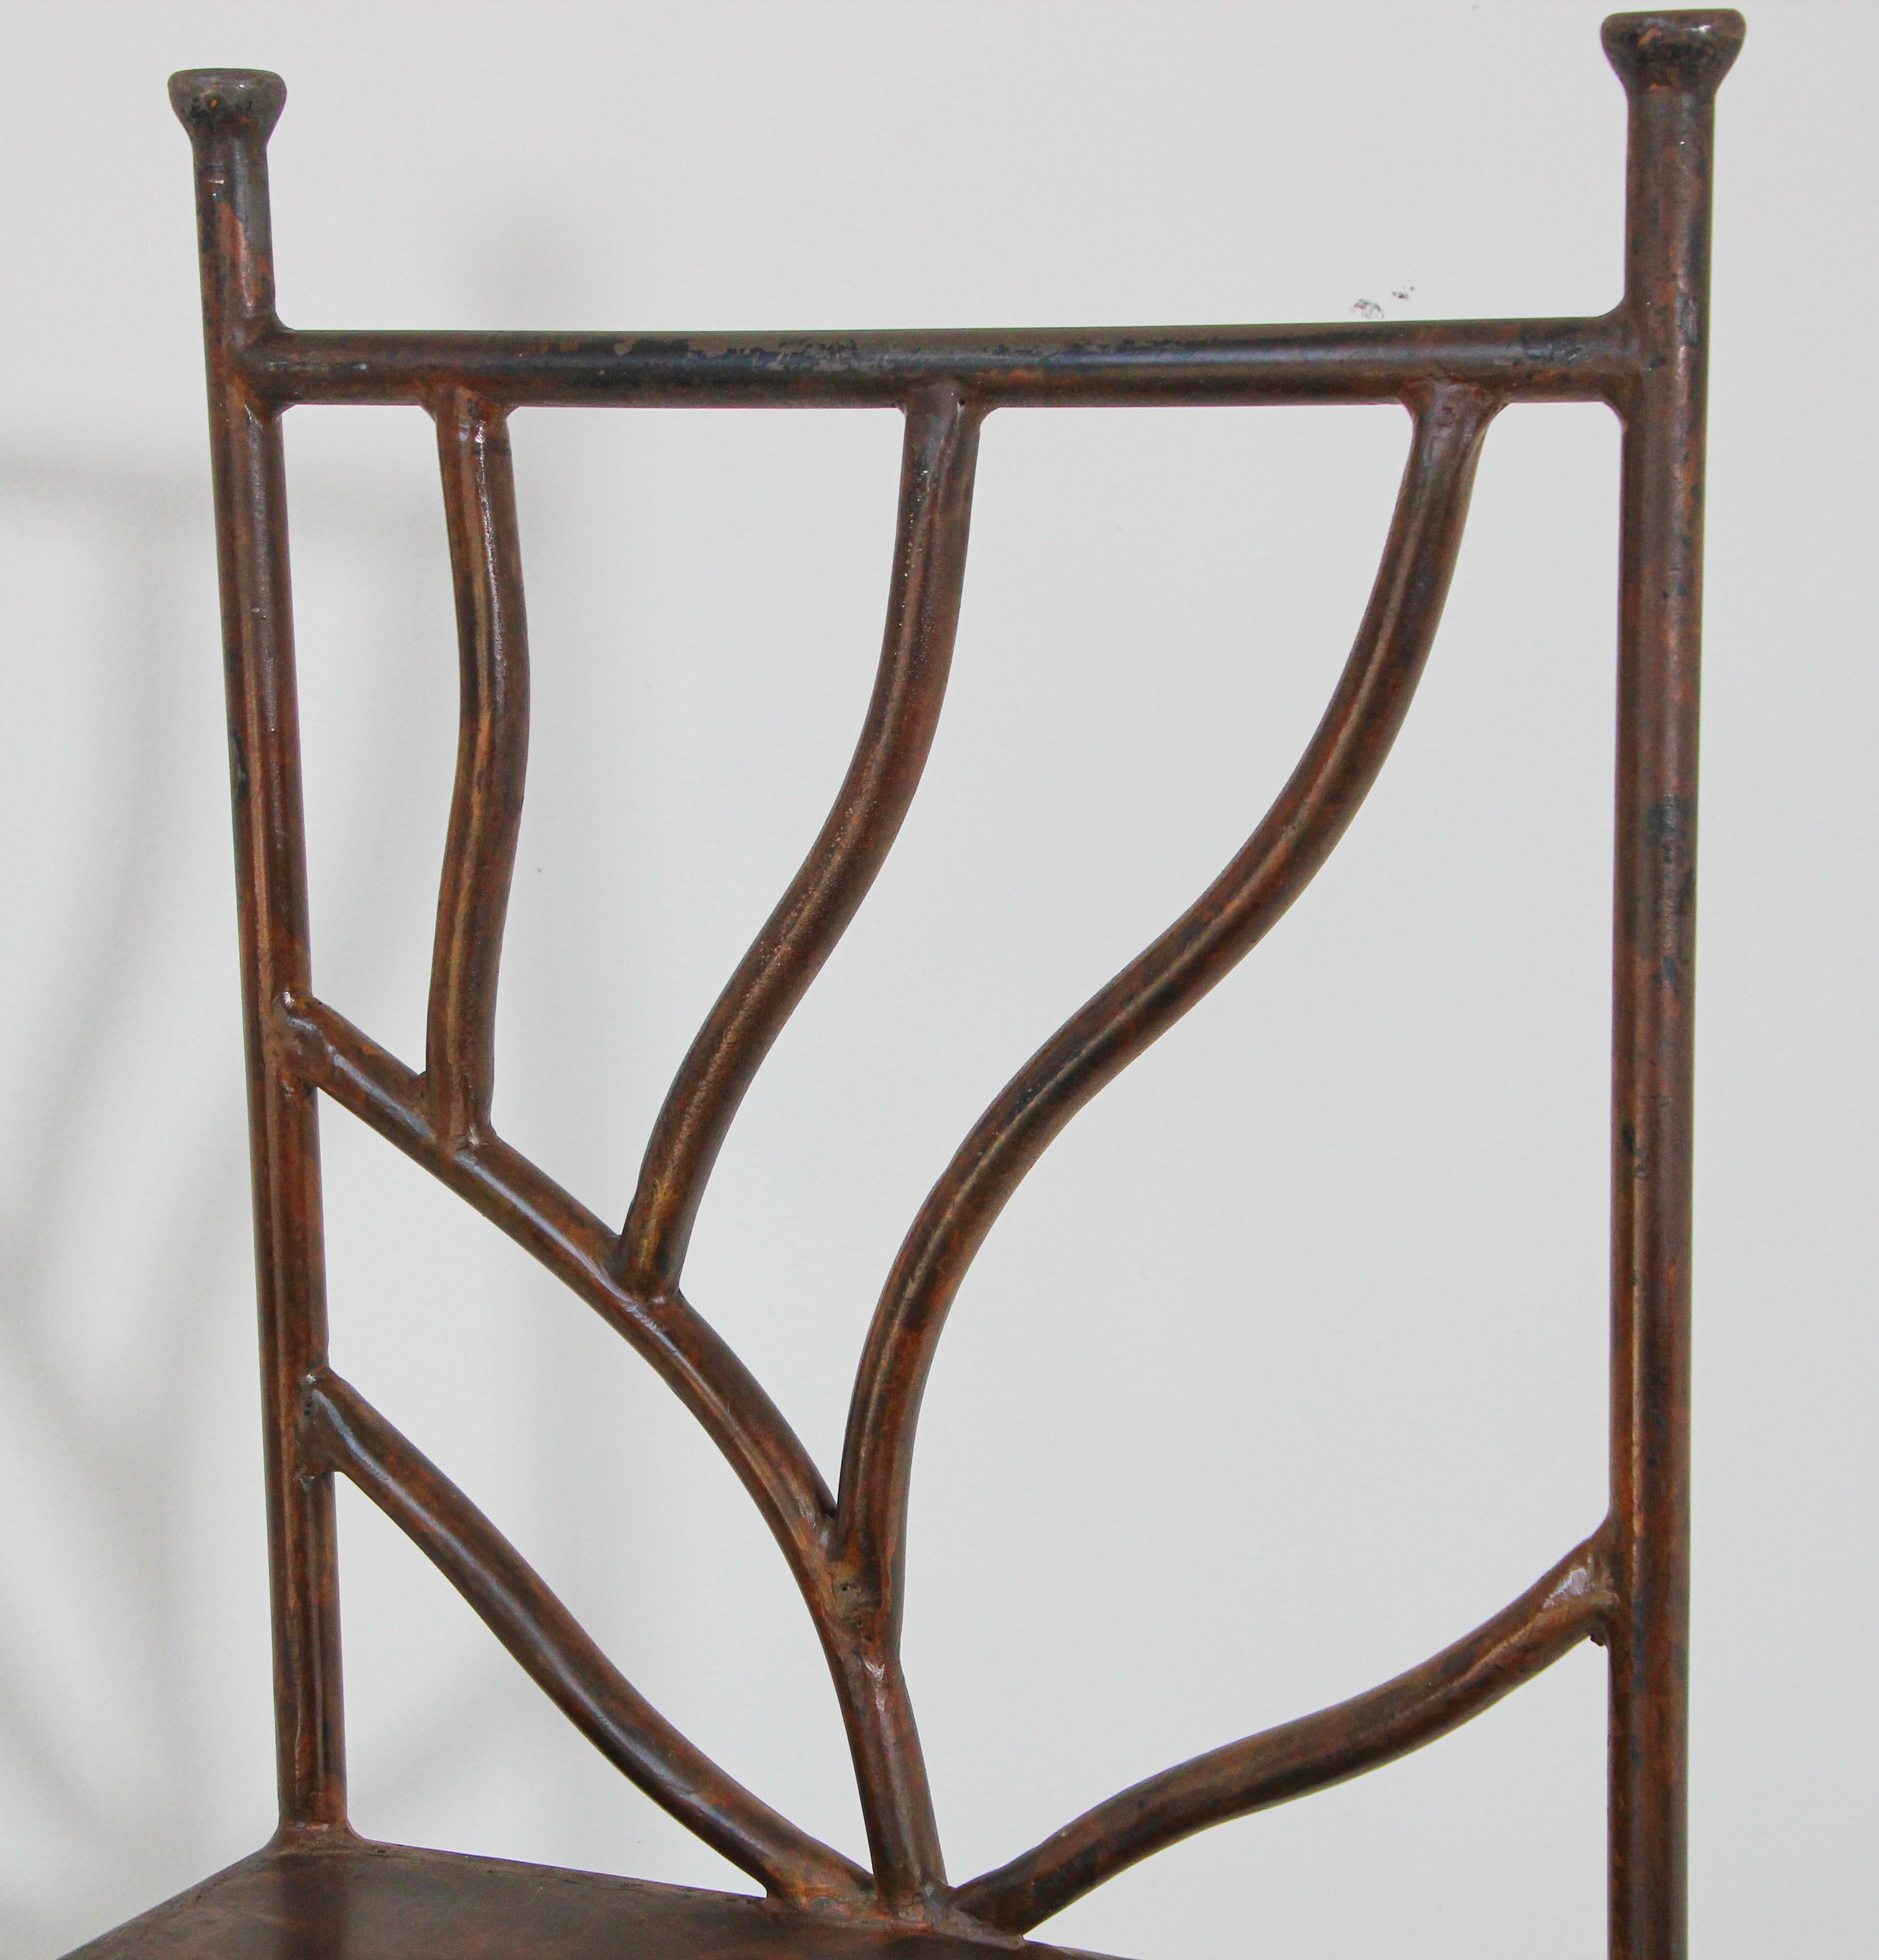 Vintage Wrought Iron Barstools with Back Set of Two Spanish Revival In Good Condition For Sale In North Hollywood, CA